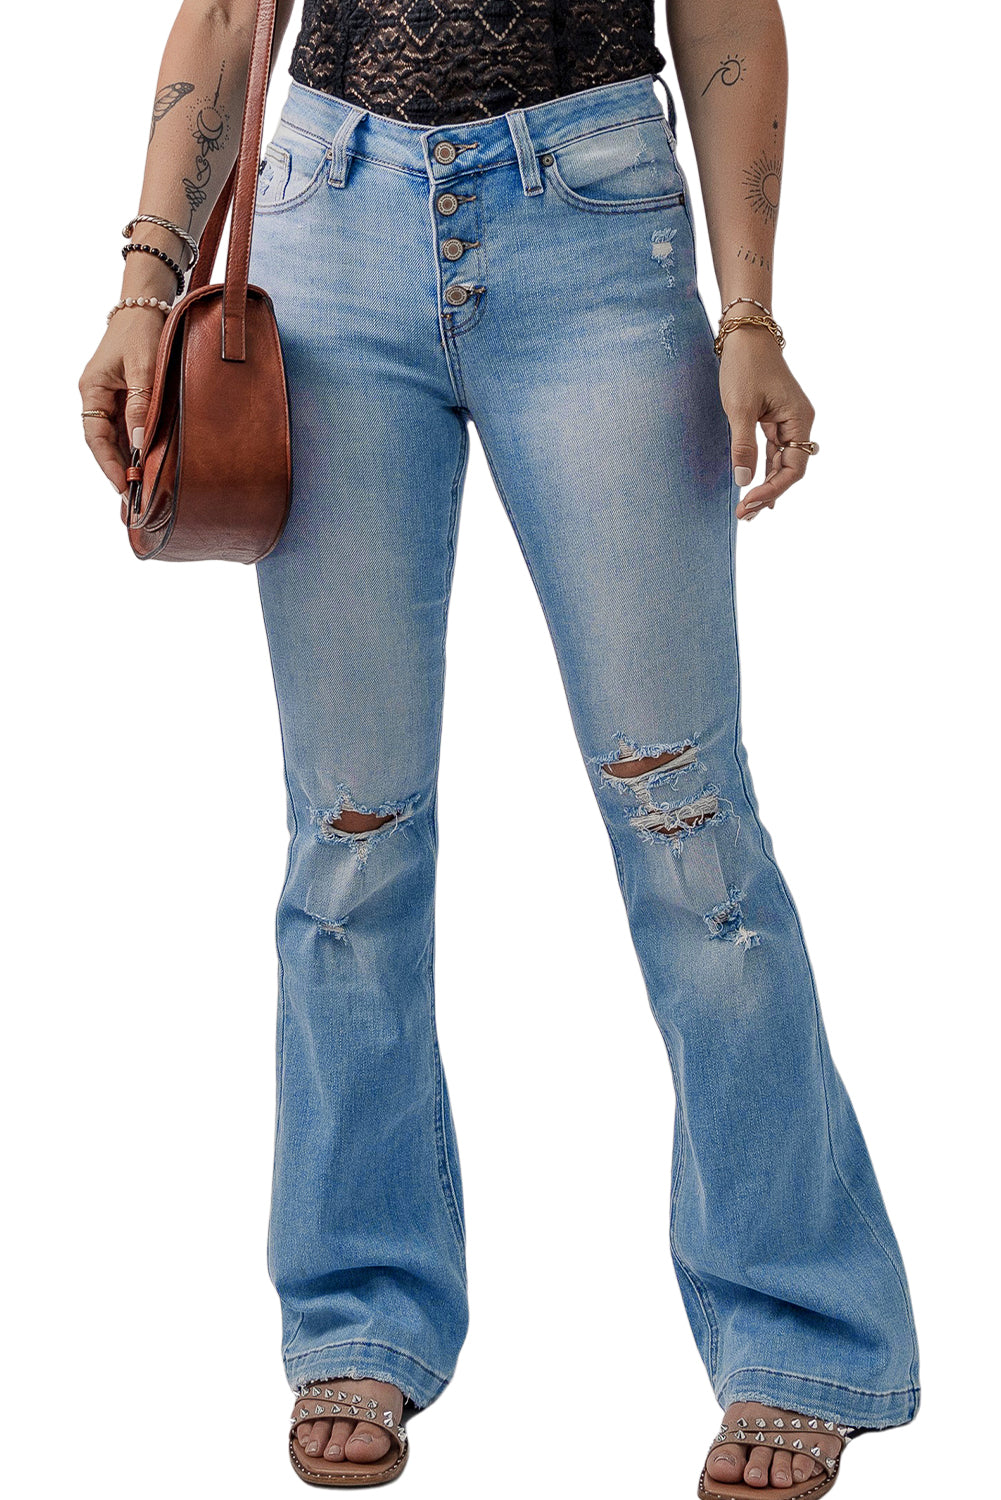 Beau Blue High Waist Button Front Ripped Flare Jeans - SELFTRITSS